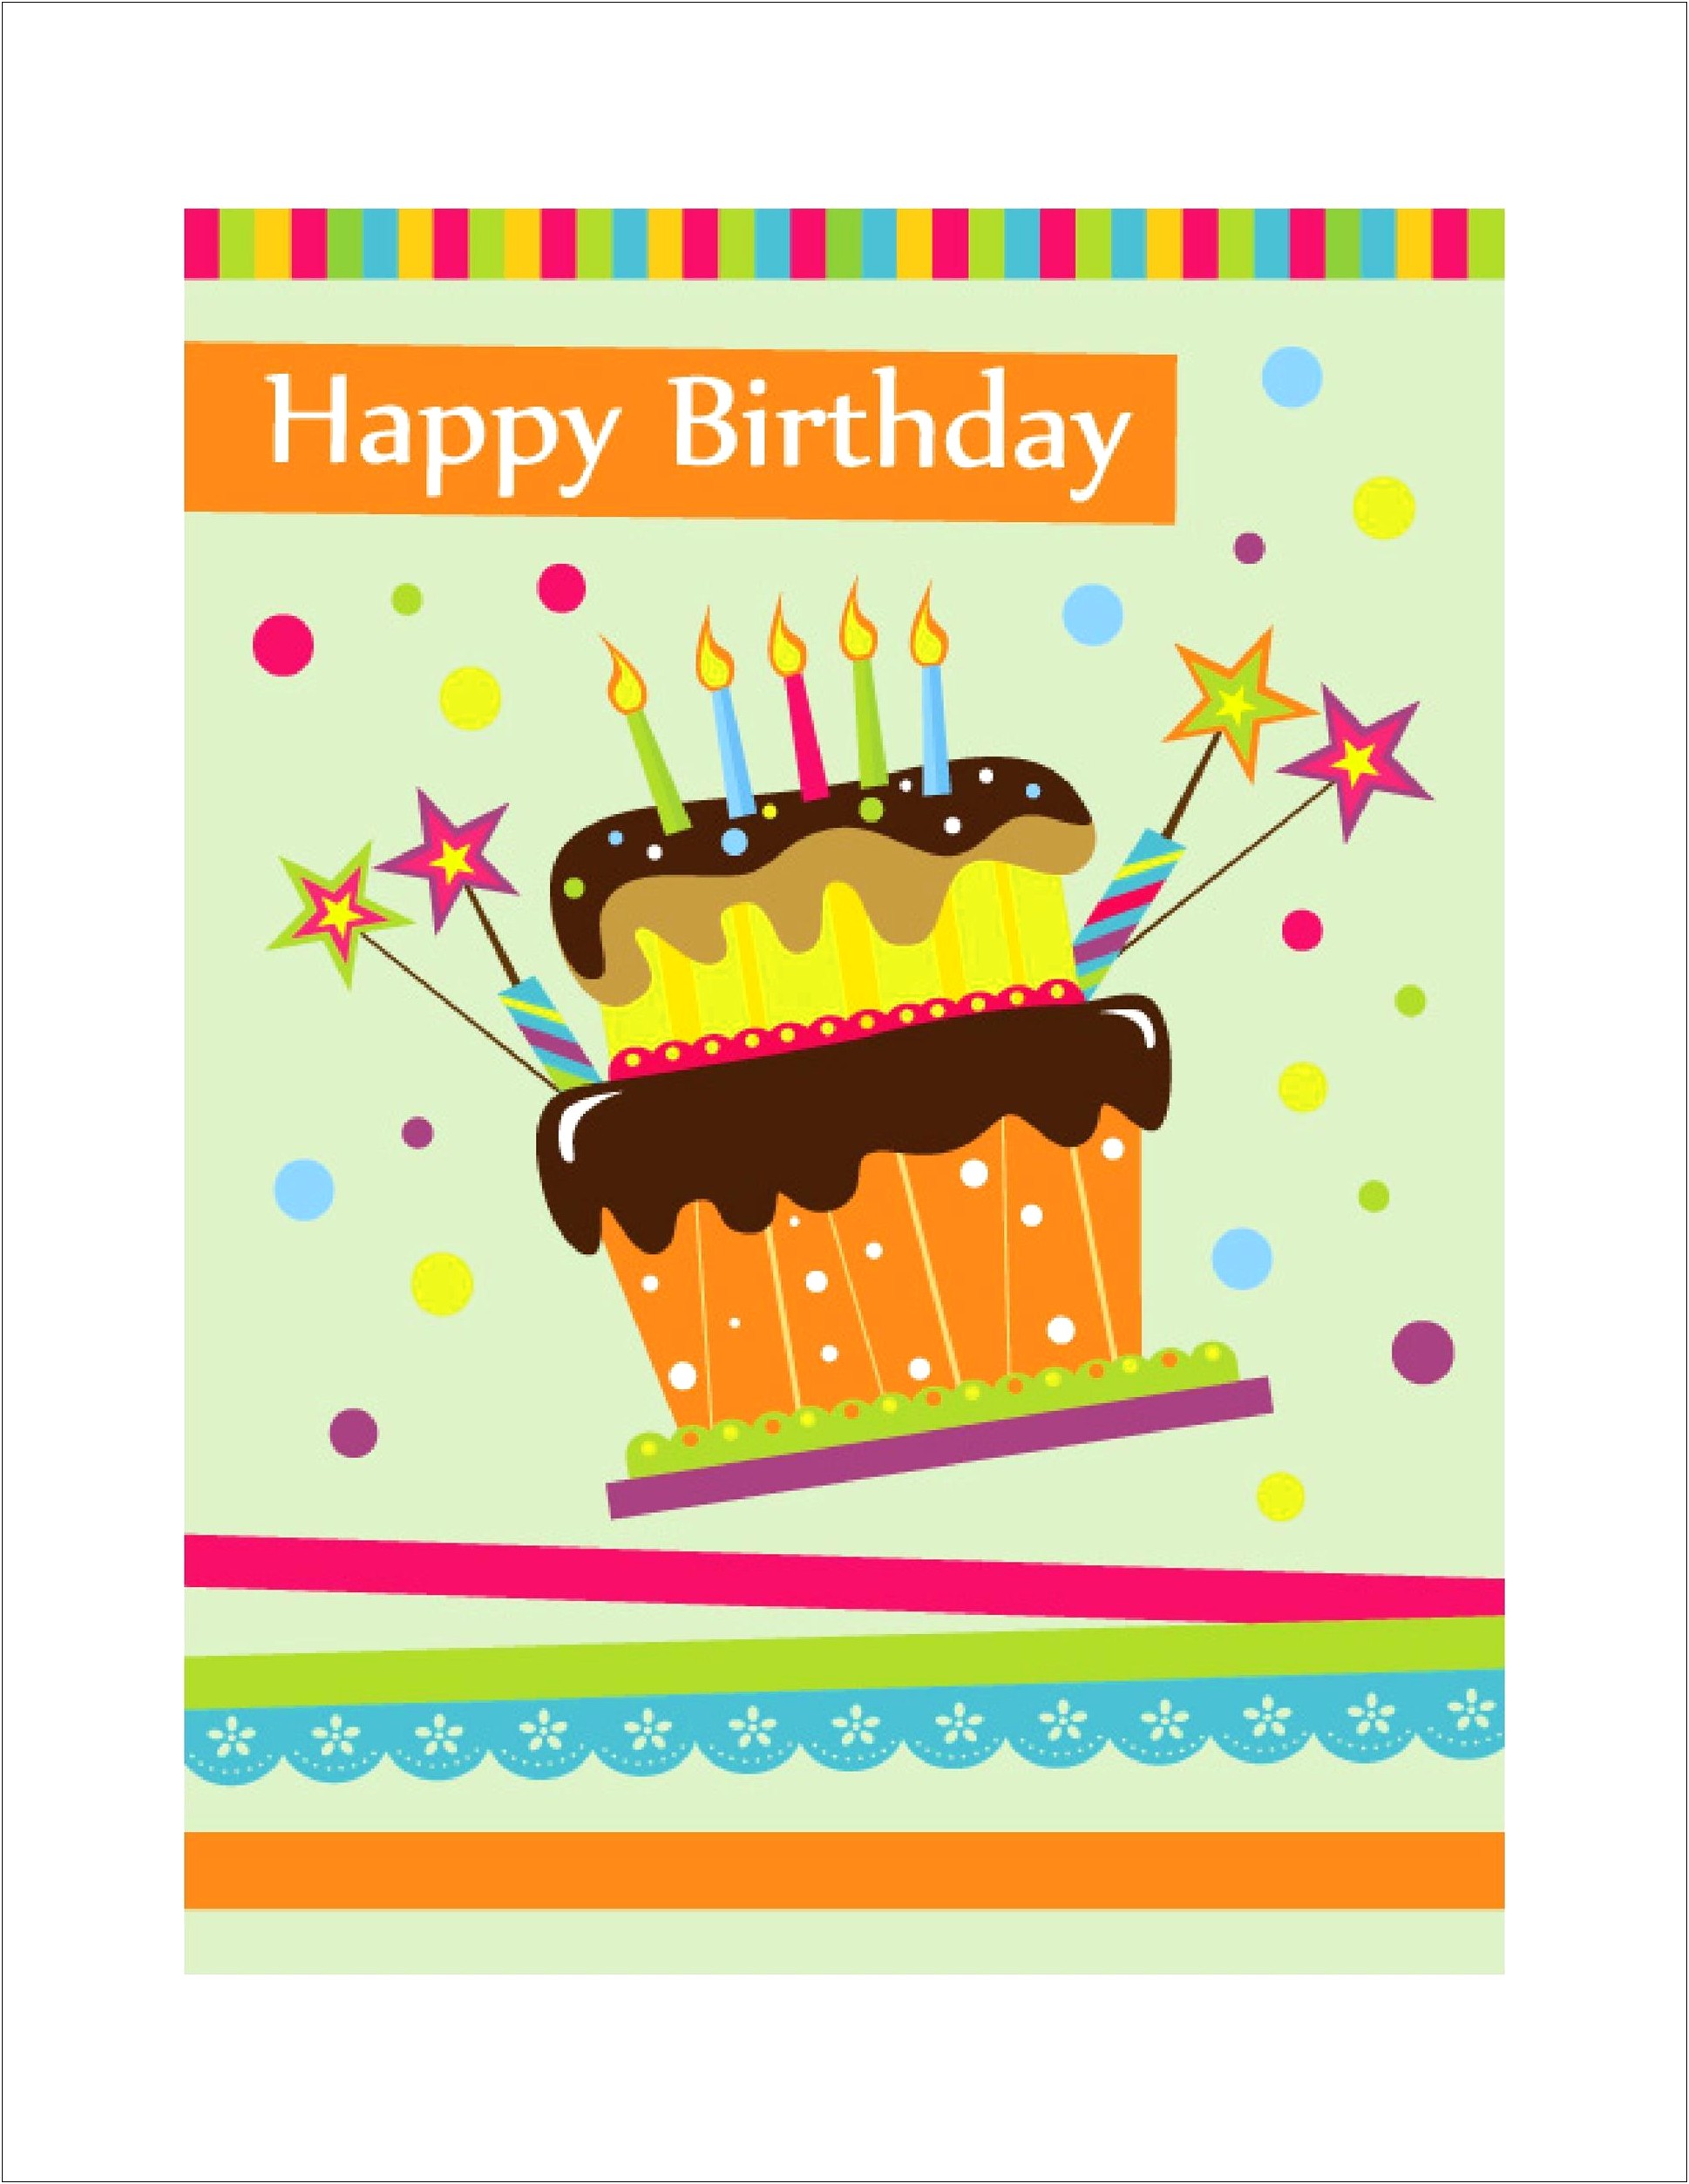 happy-birthday-card-template-free-download-templates-resume-designs